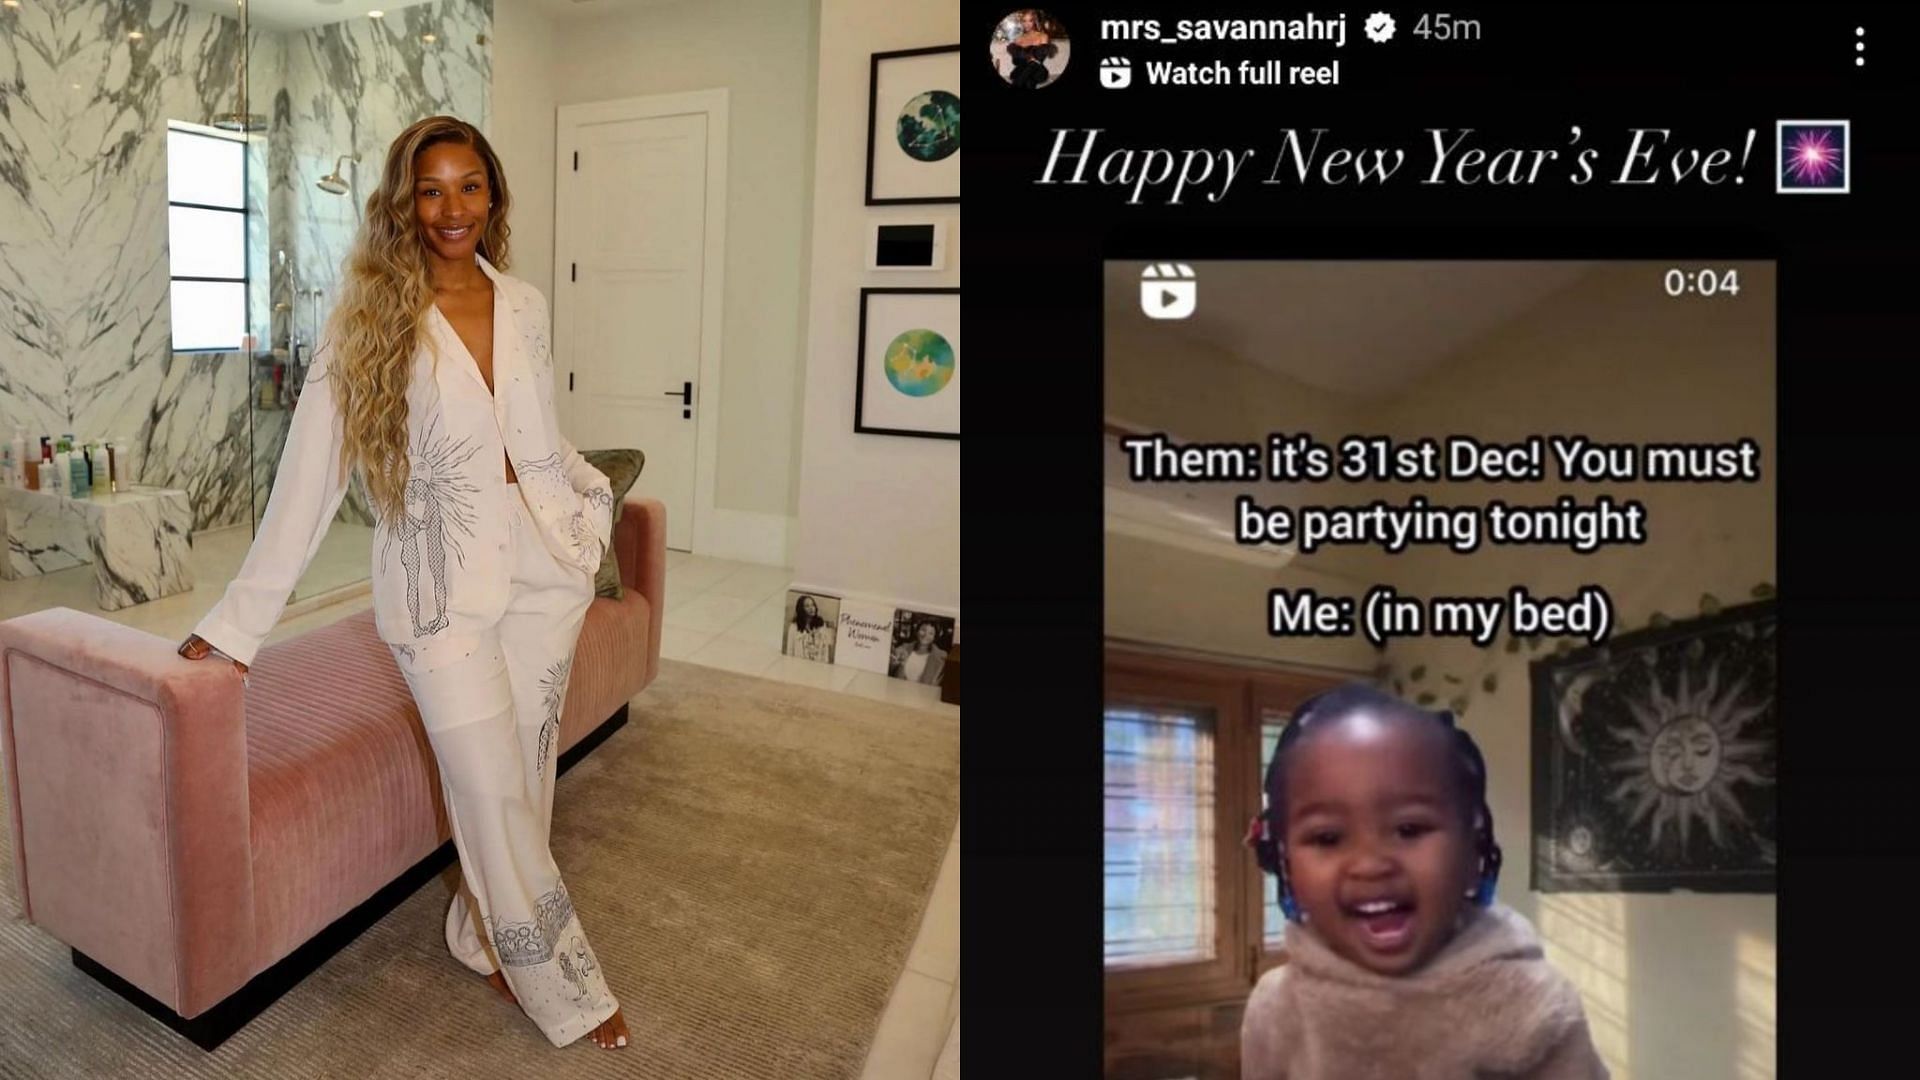 Savannah James comically suggests her 